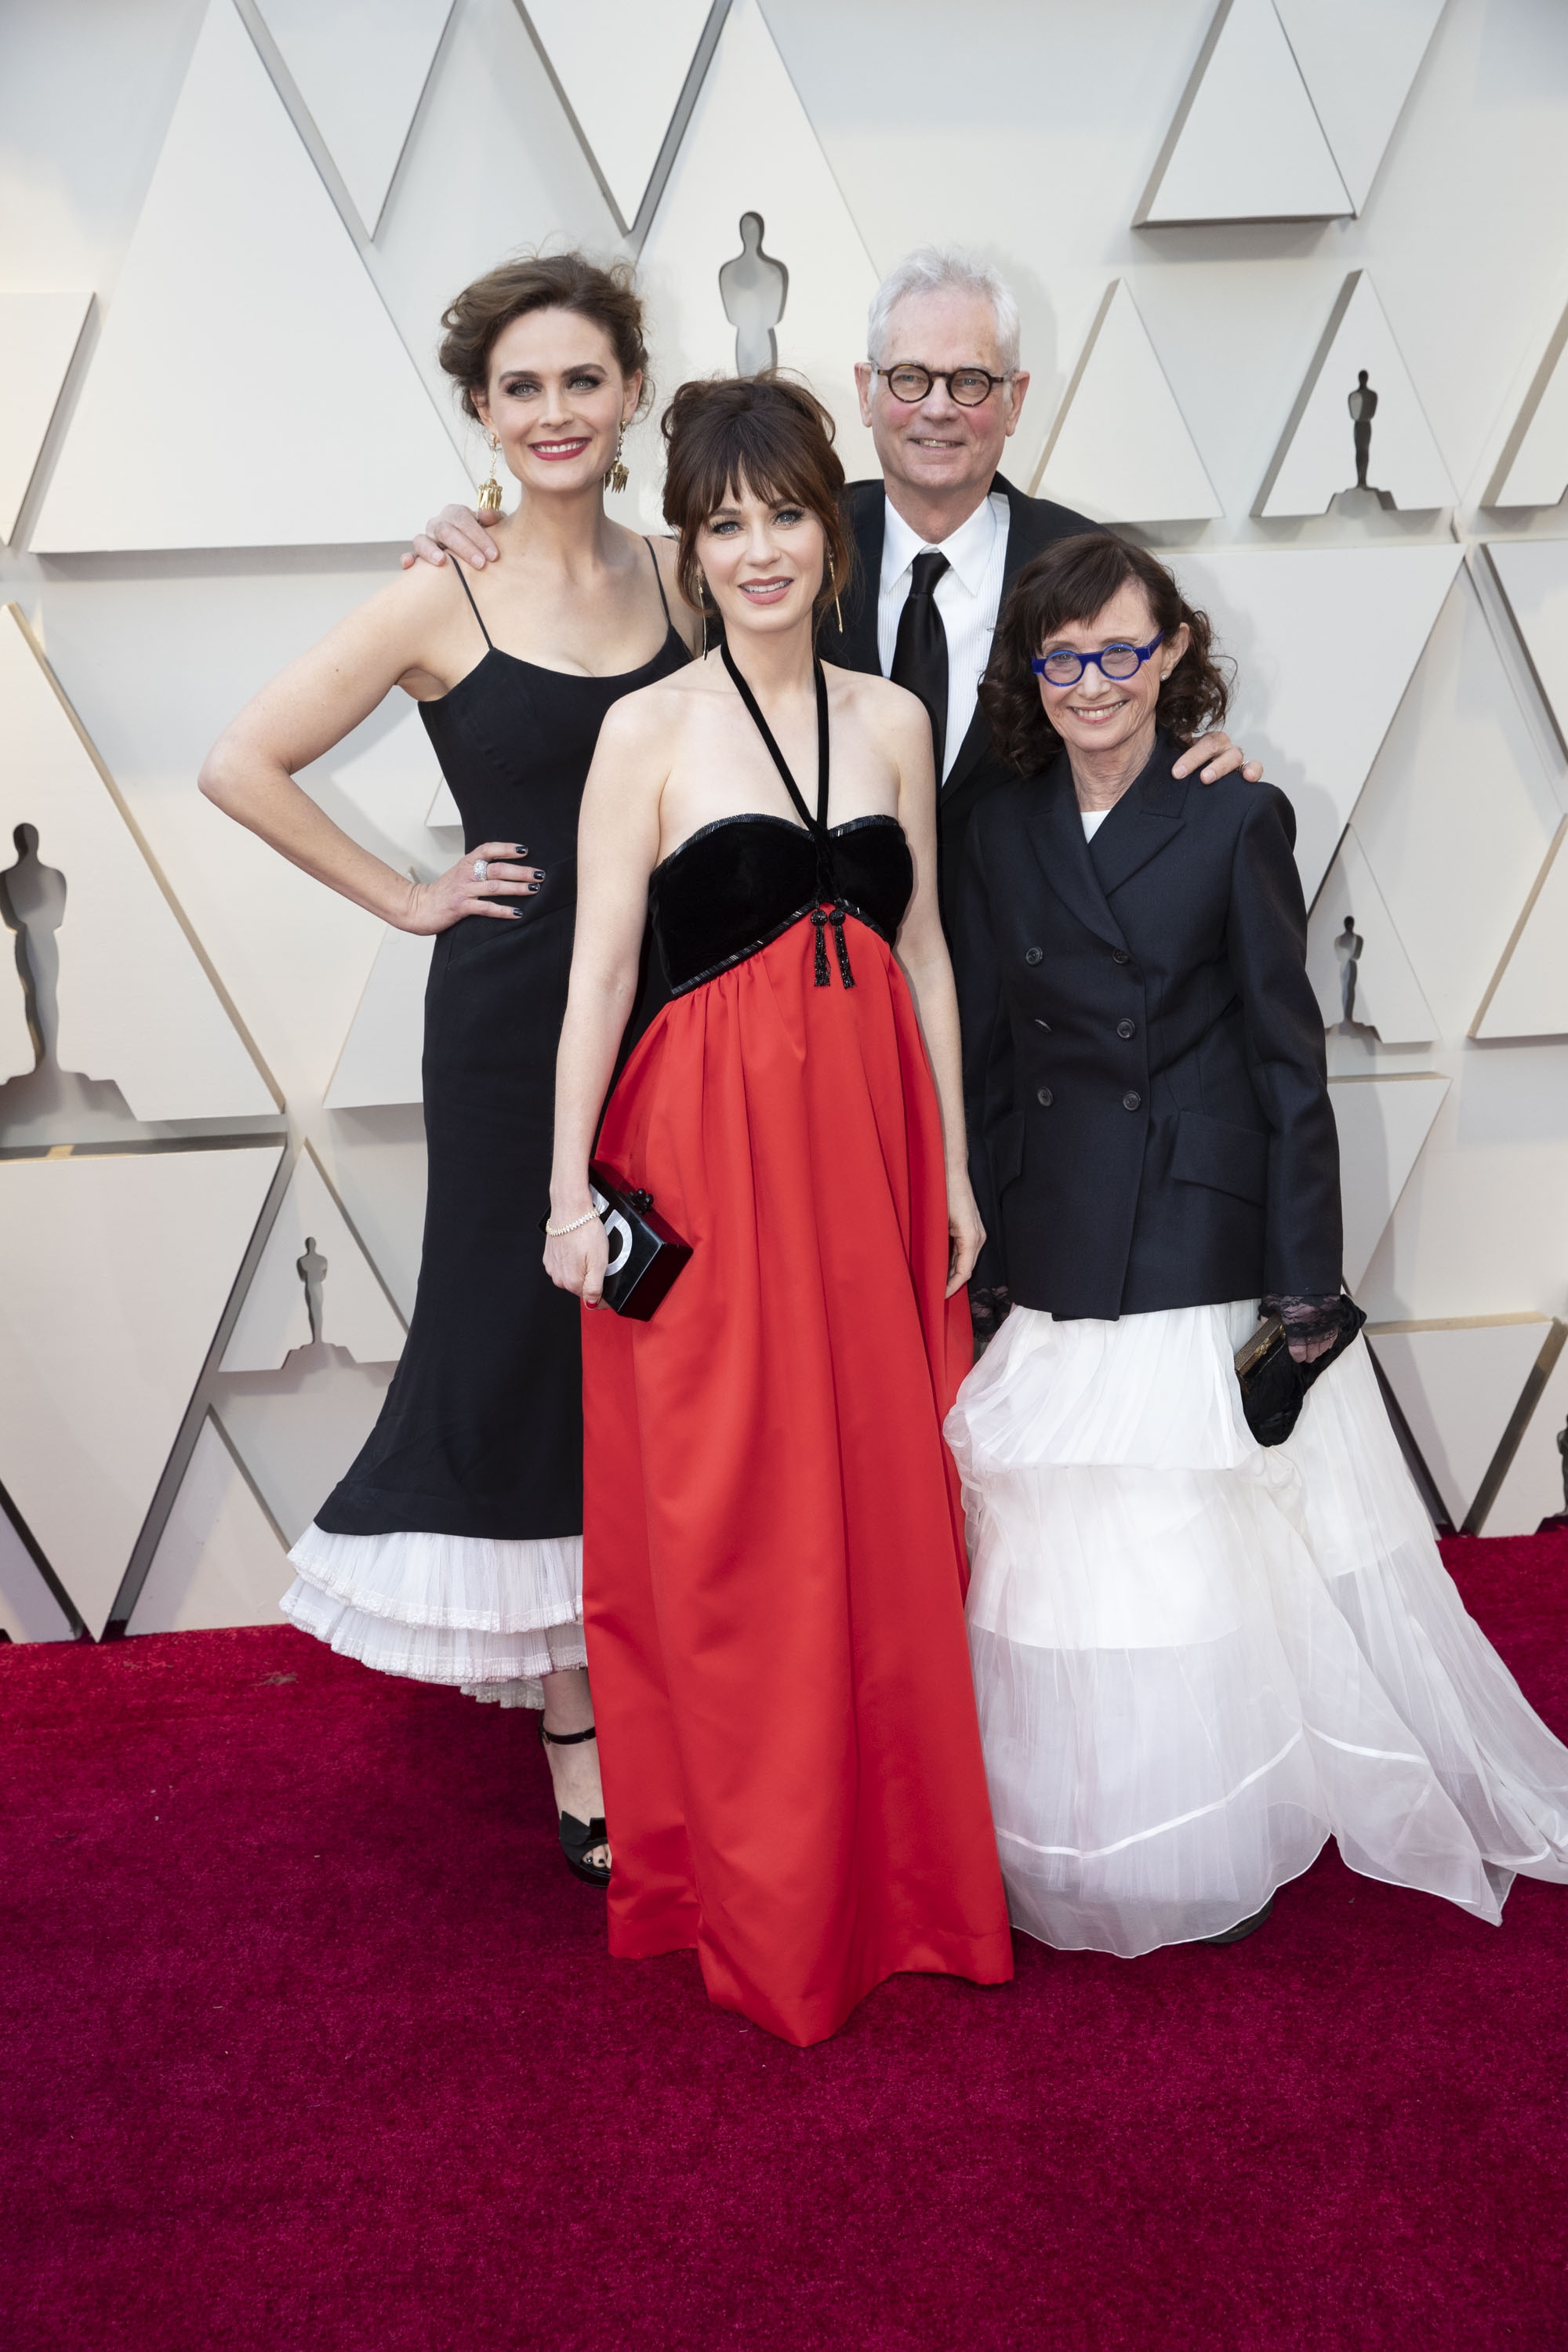 The New Girls star pictured at the Oscars with her father Caleb, mother Mary Jo, and sister Emily Deschanel